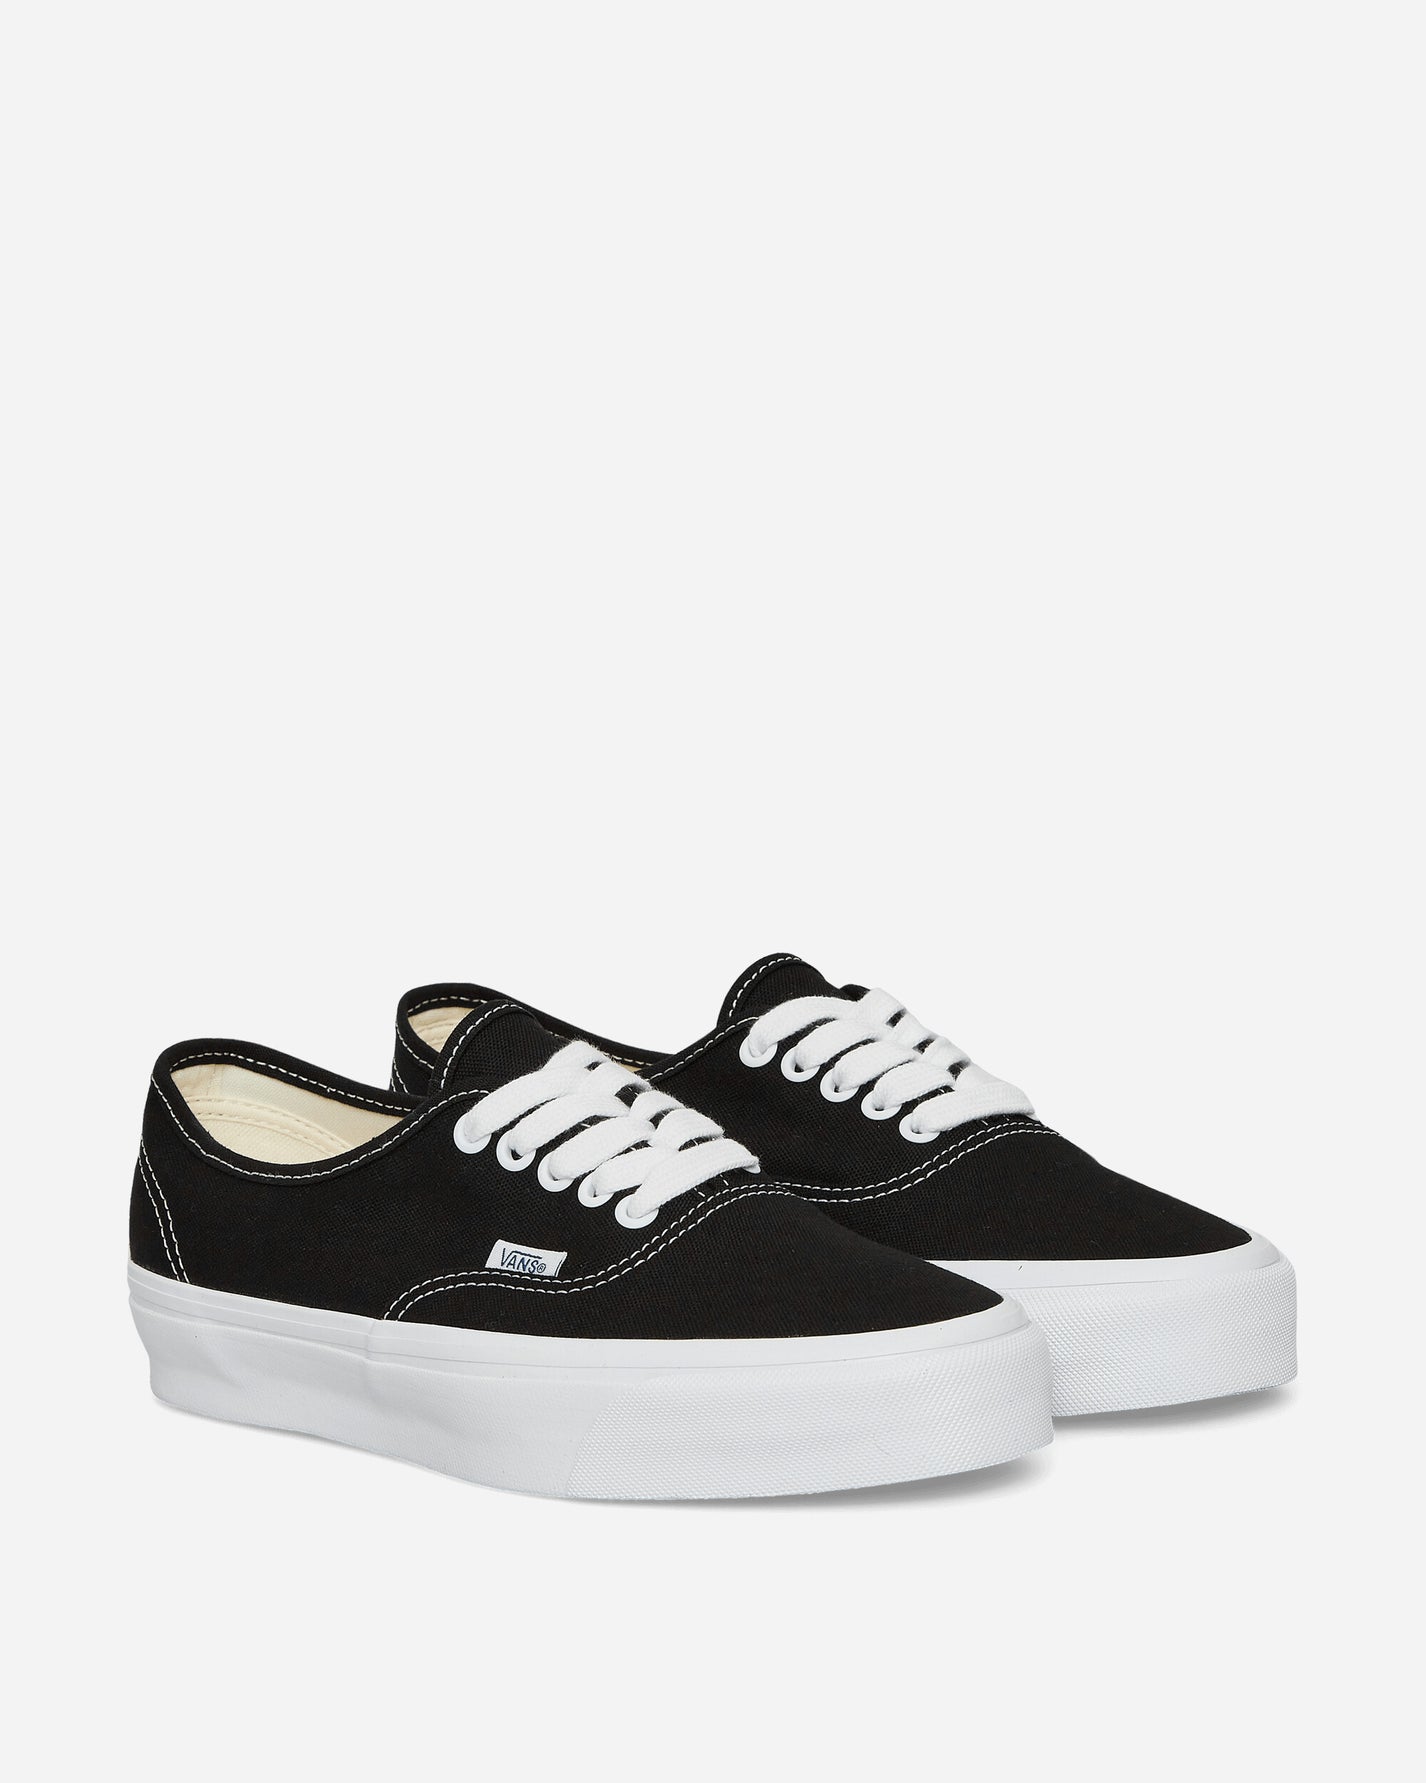 Vans Lx Authentic Reissue 44 White Sneakers Low VN000CQABA21